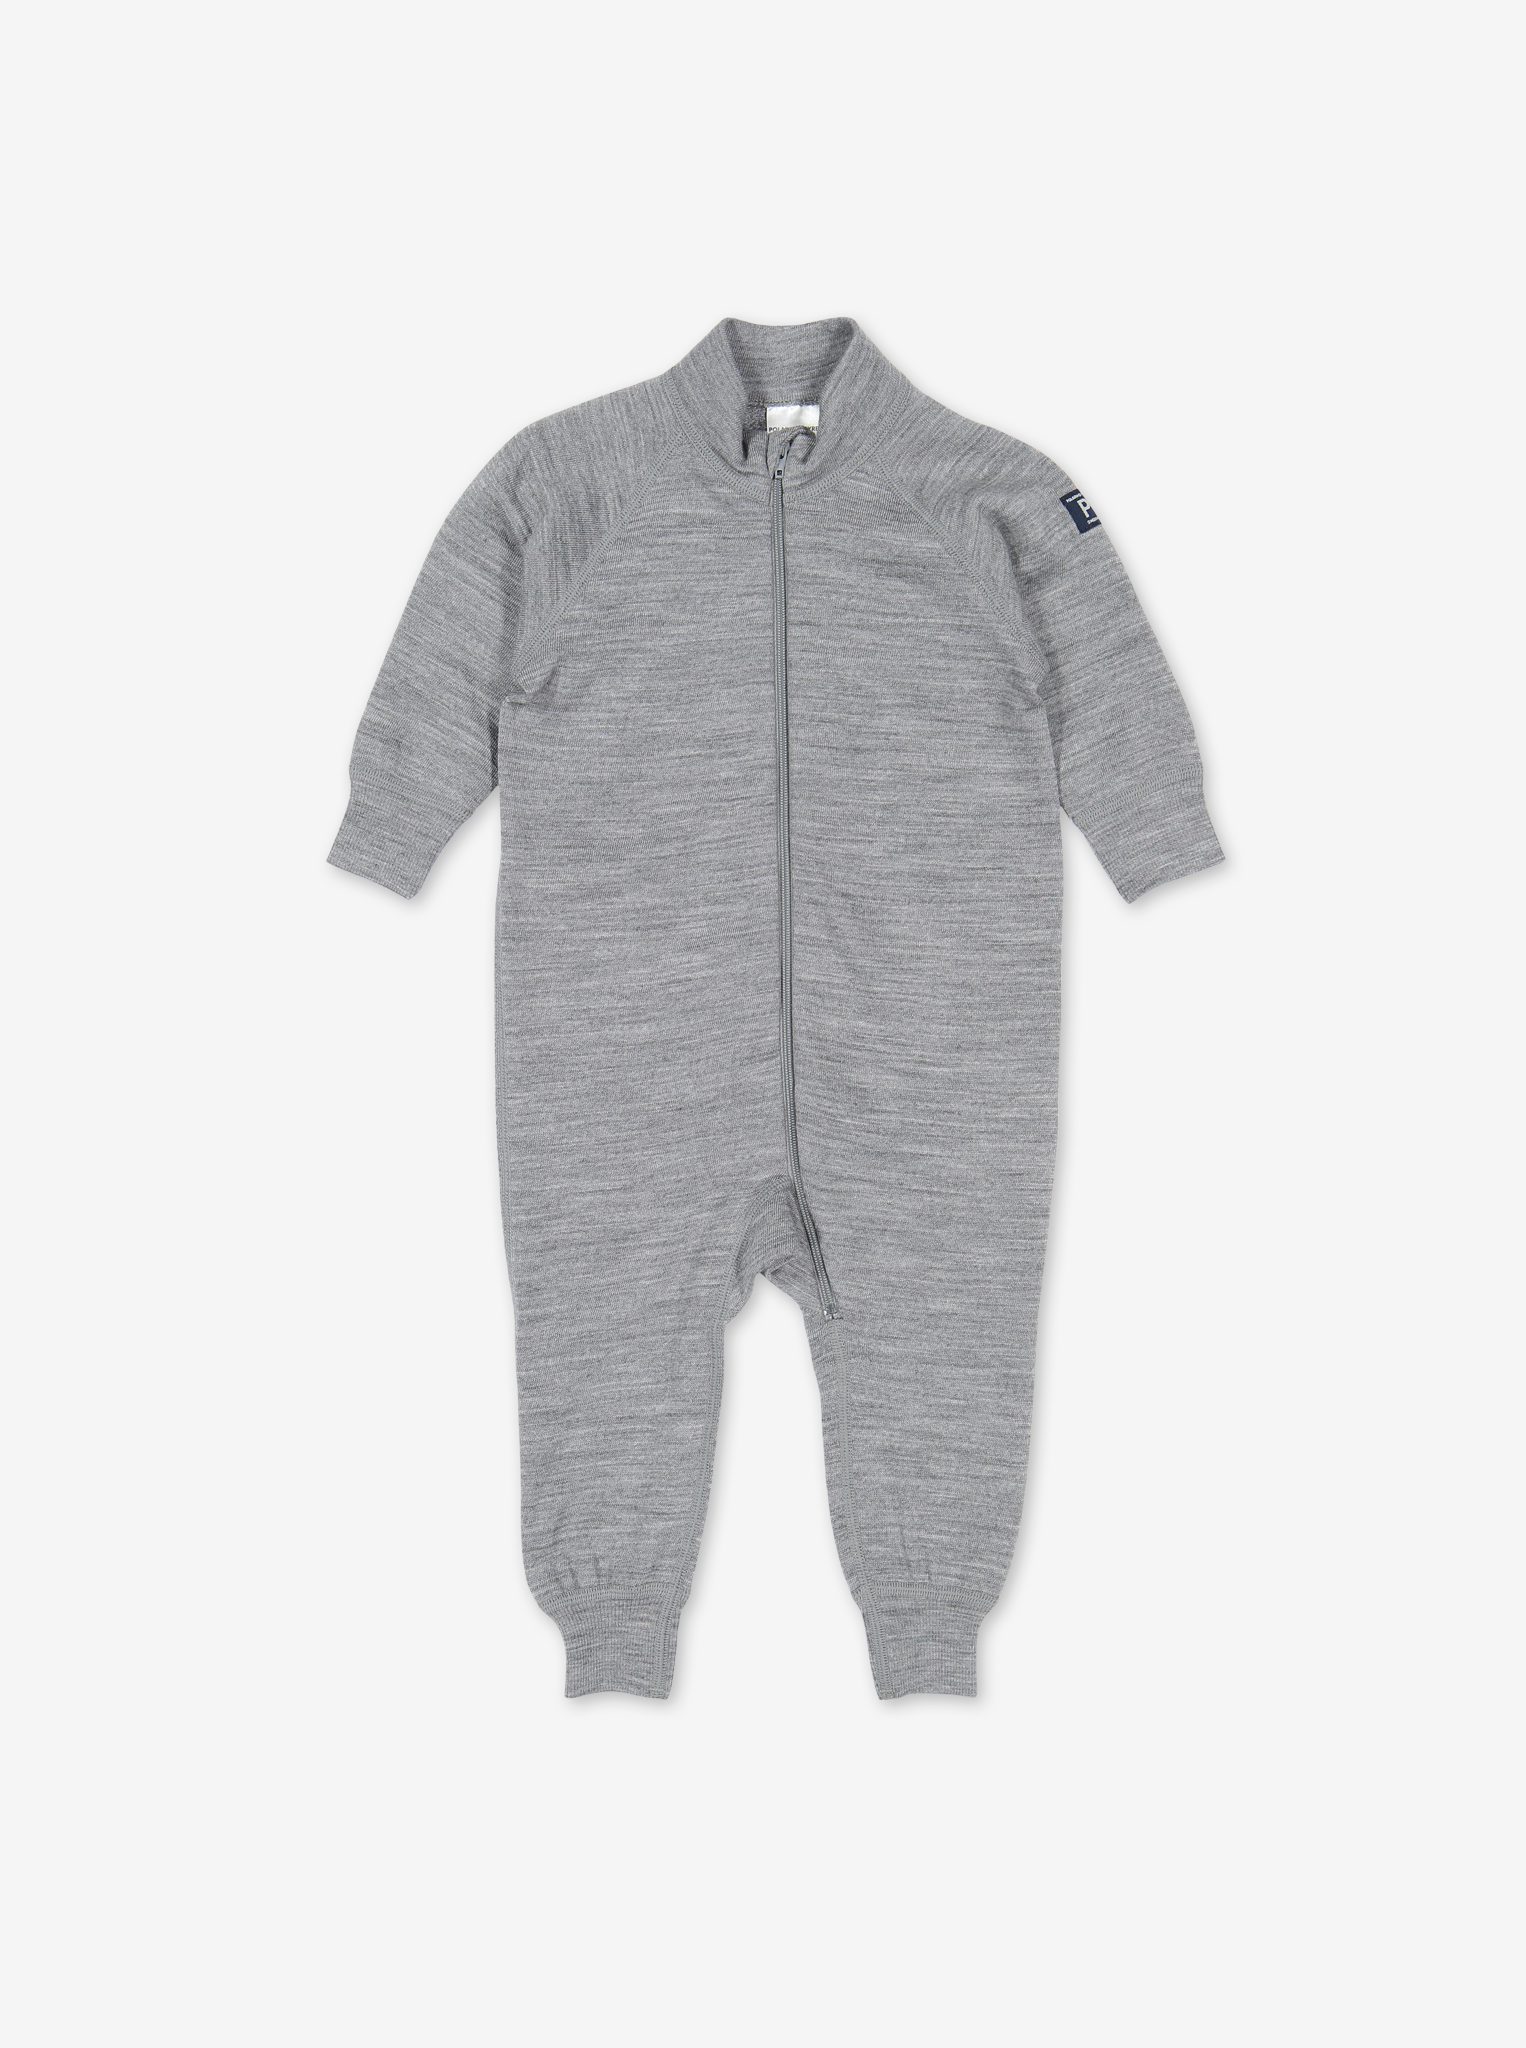 Terry Merino Thermal Kids All-In-One